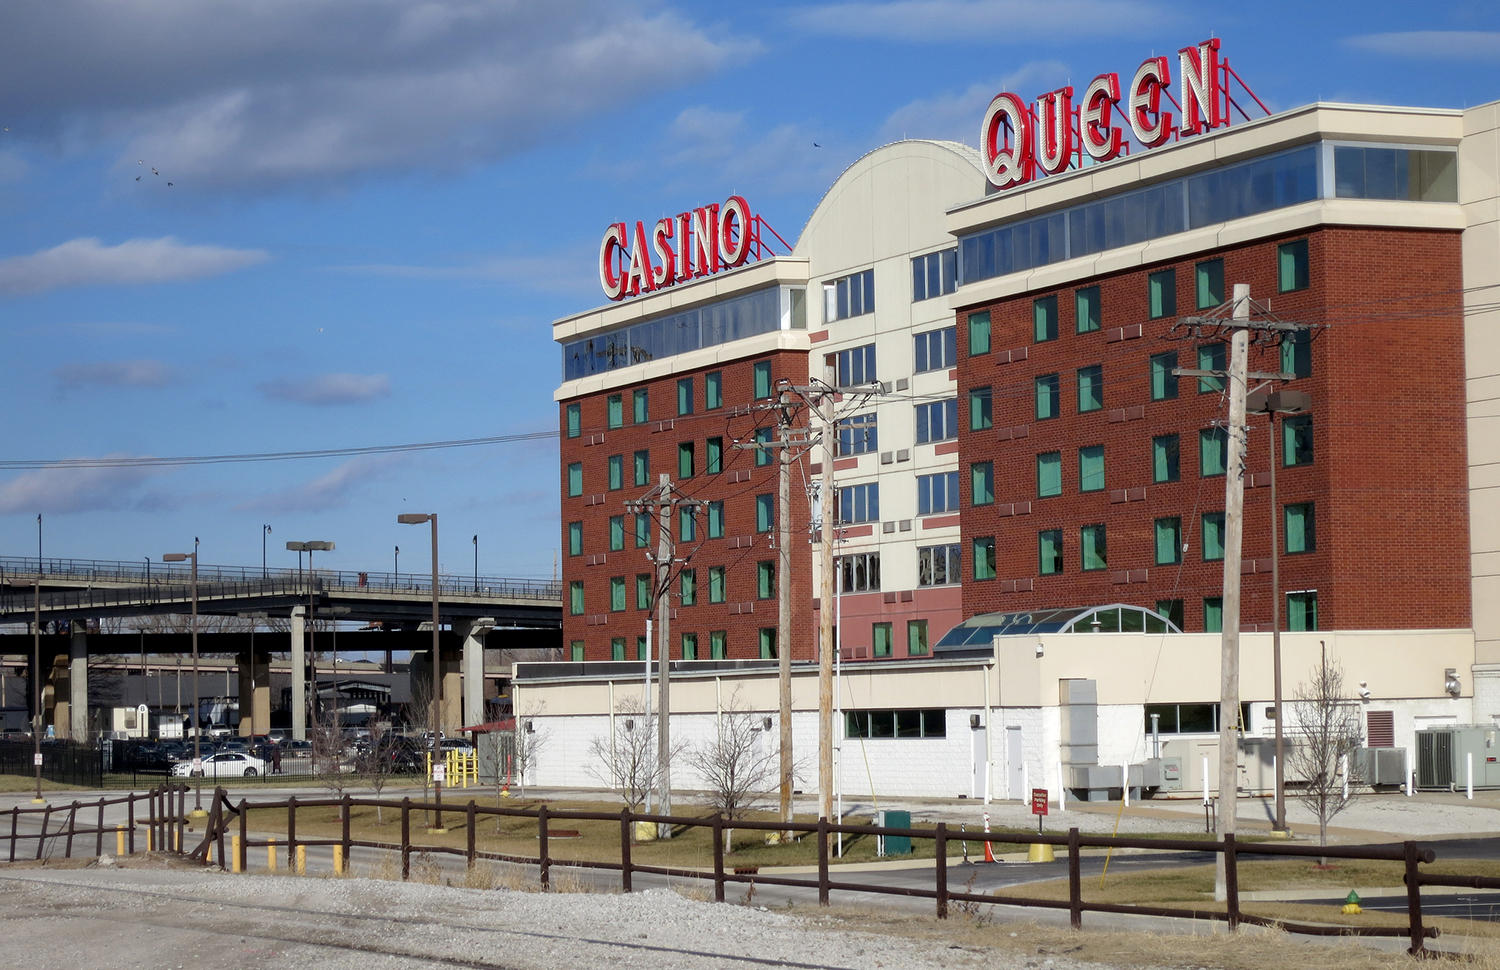 king of queens casino ny